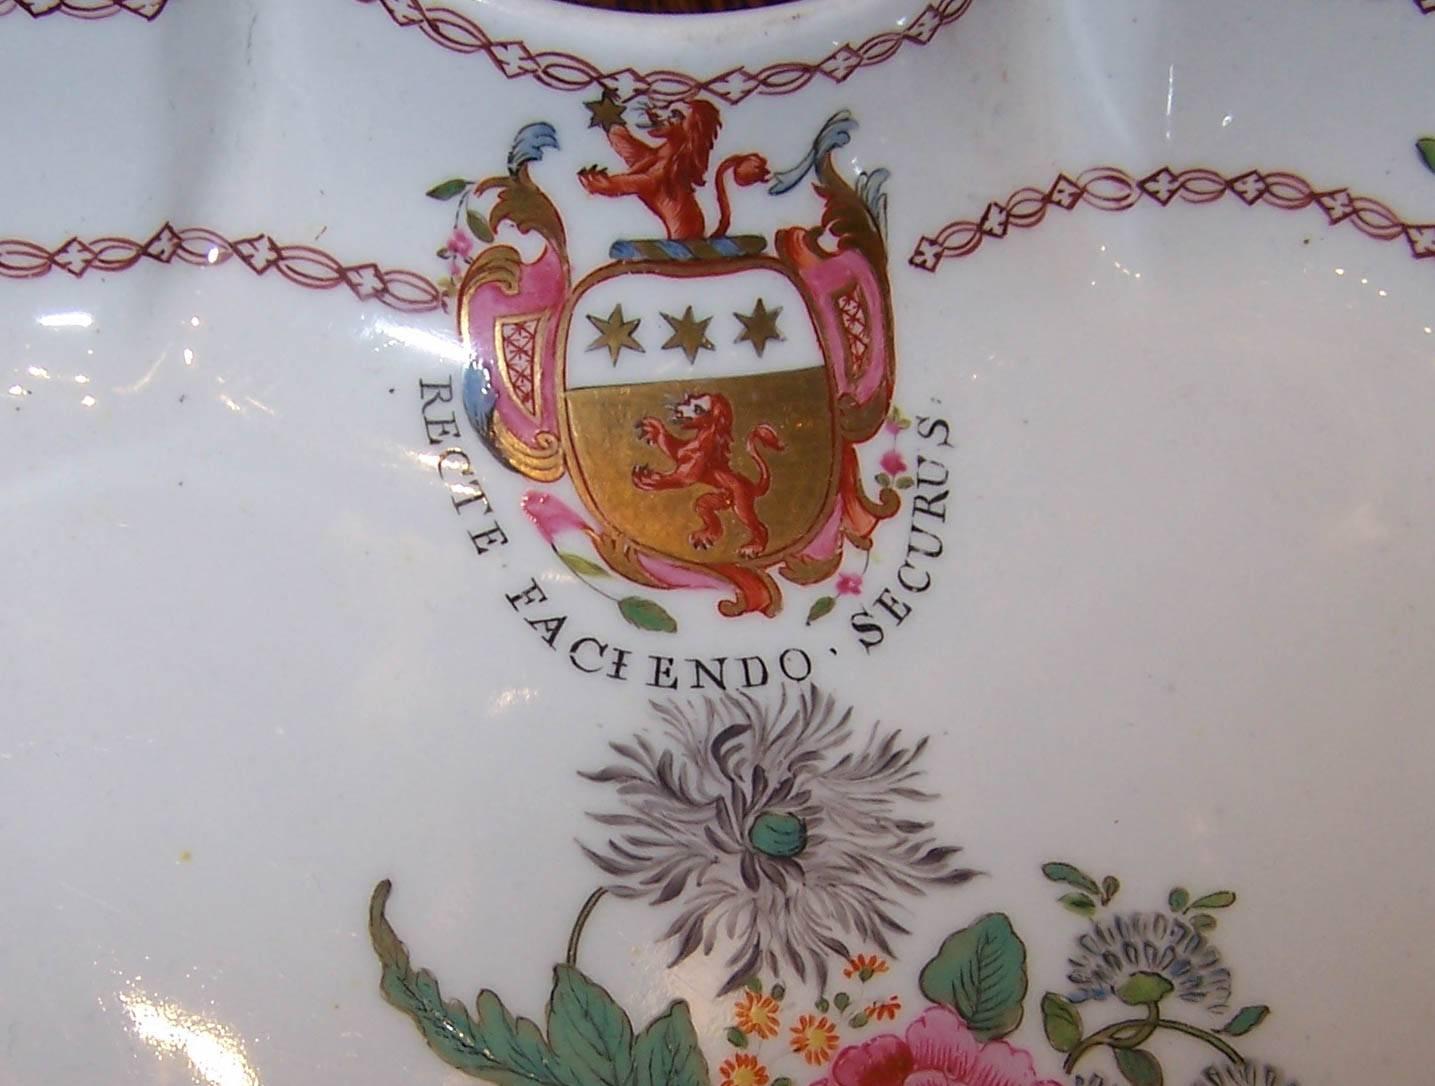 This pair of antique English armorial porcelain dishes display the crest & motto 